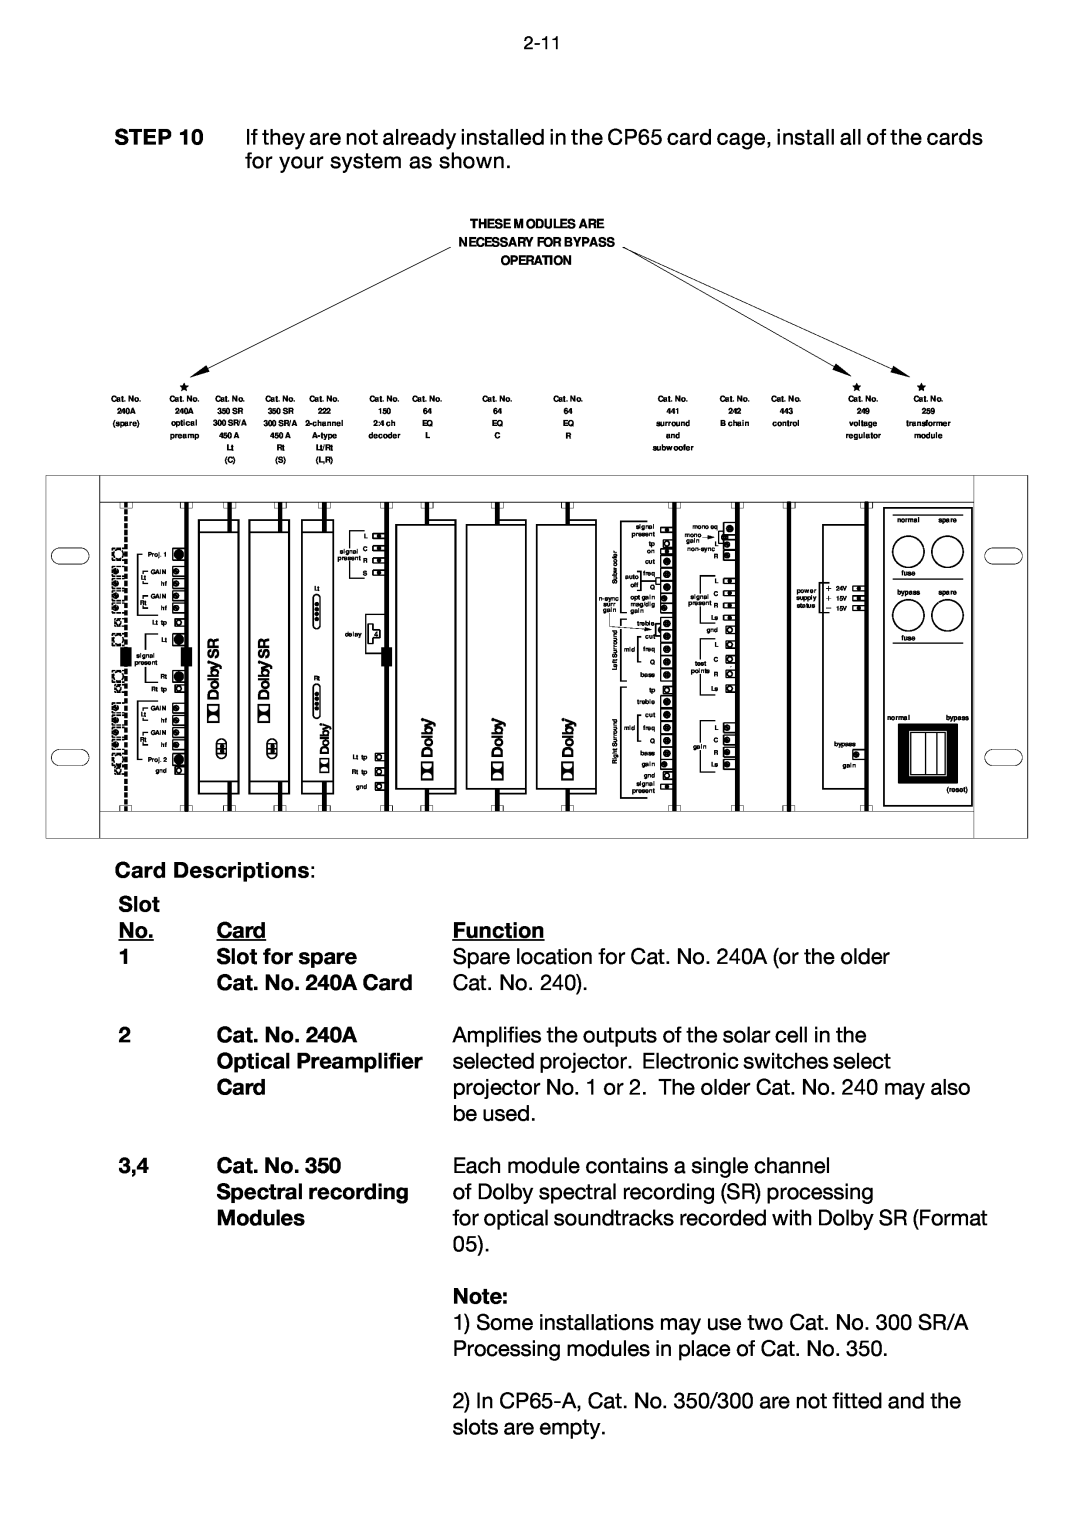 Dolby Laboratories CP65 Card Descriptions, Function, Slot for spare, Spare location for Cat. No. 240A or the older 